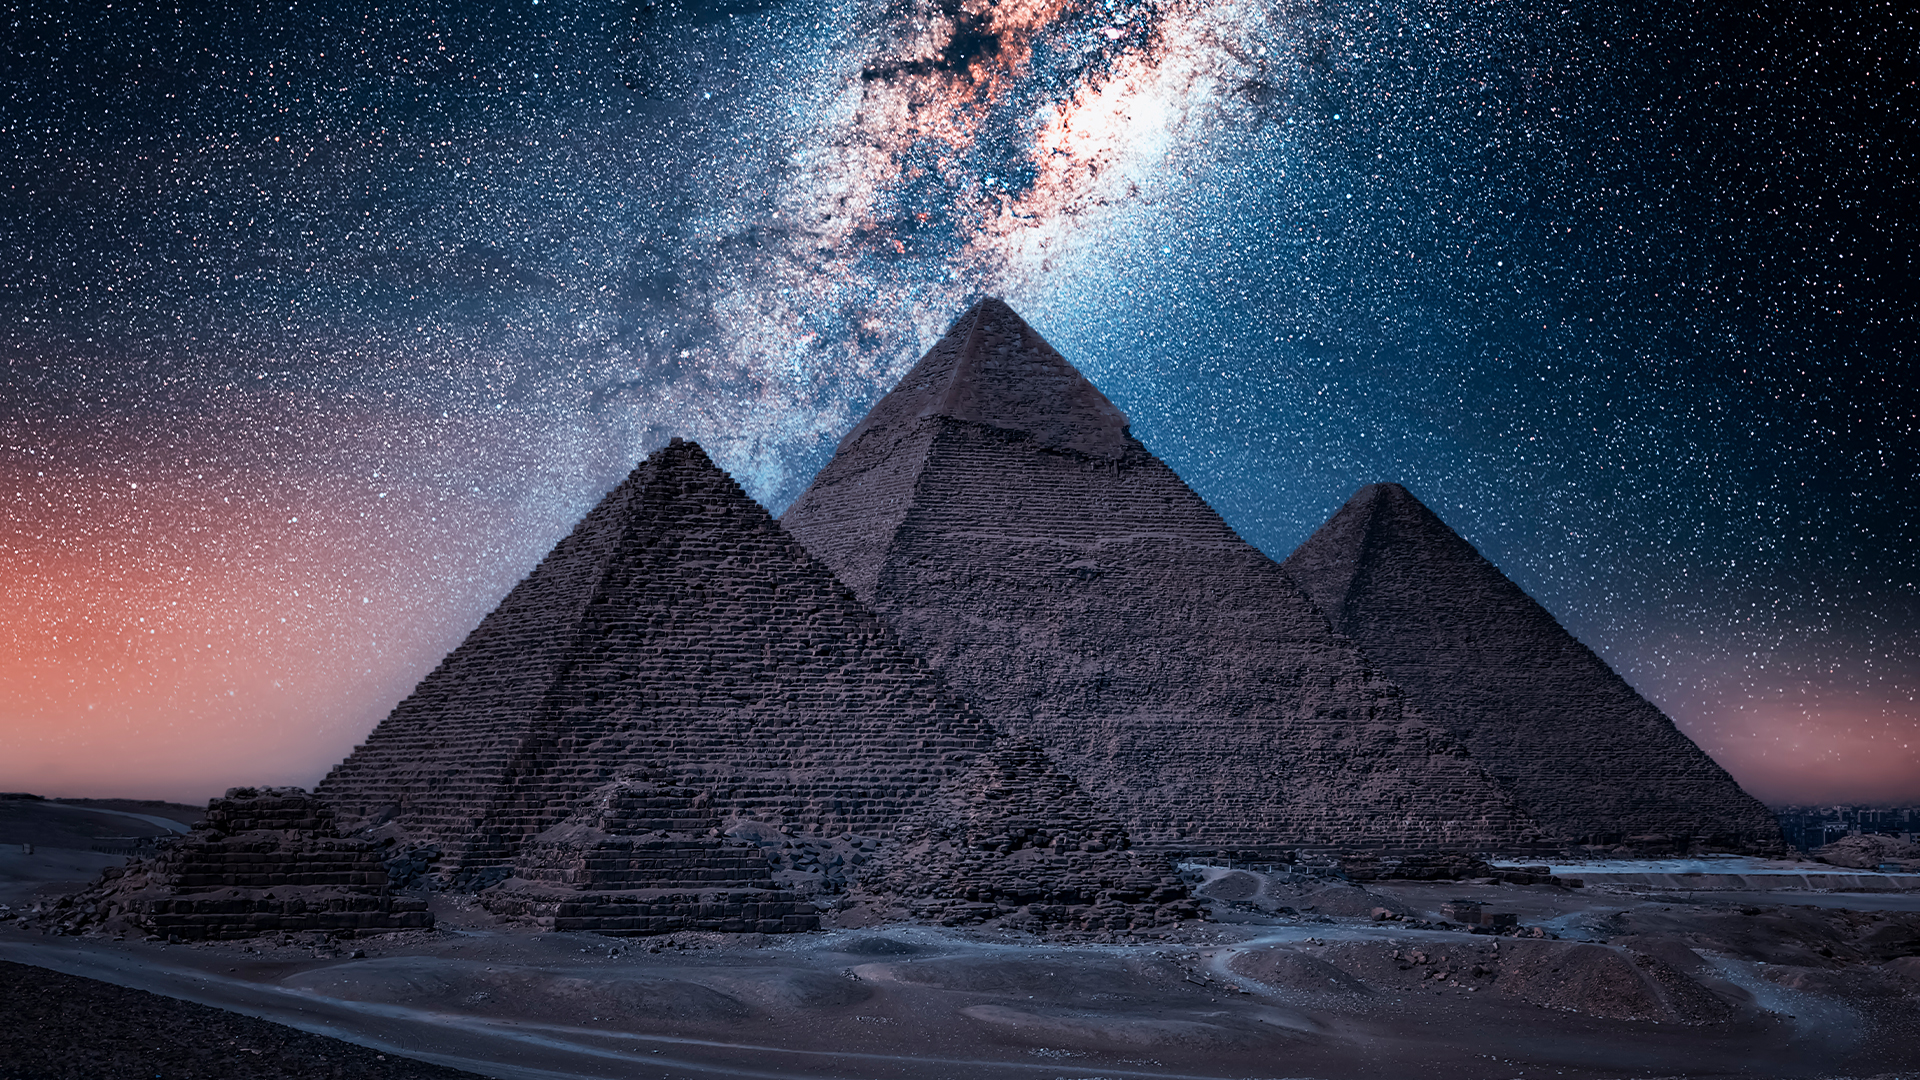 How old are the Egyptian pyramids?